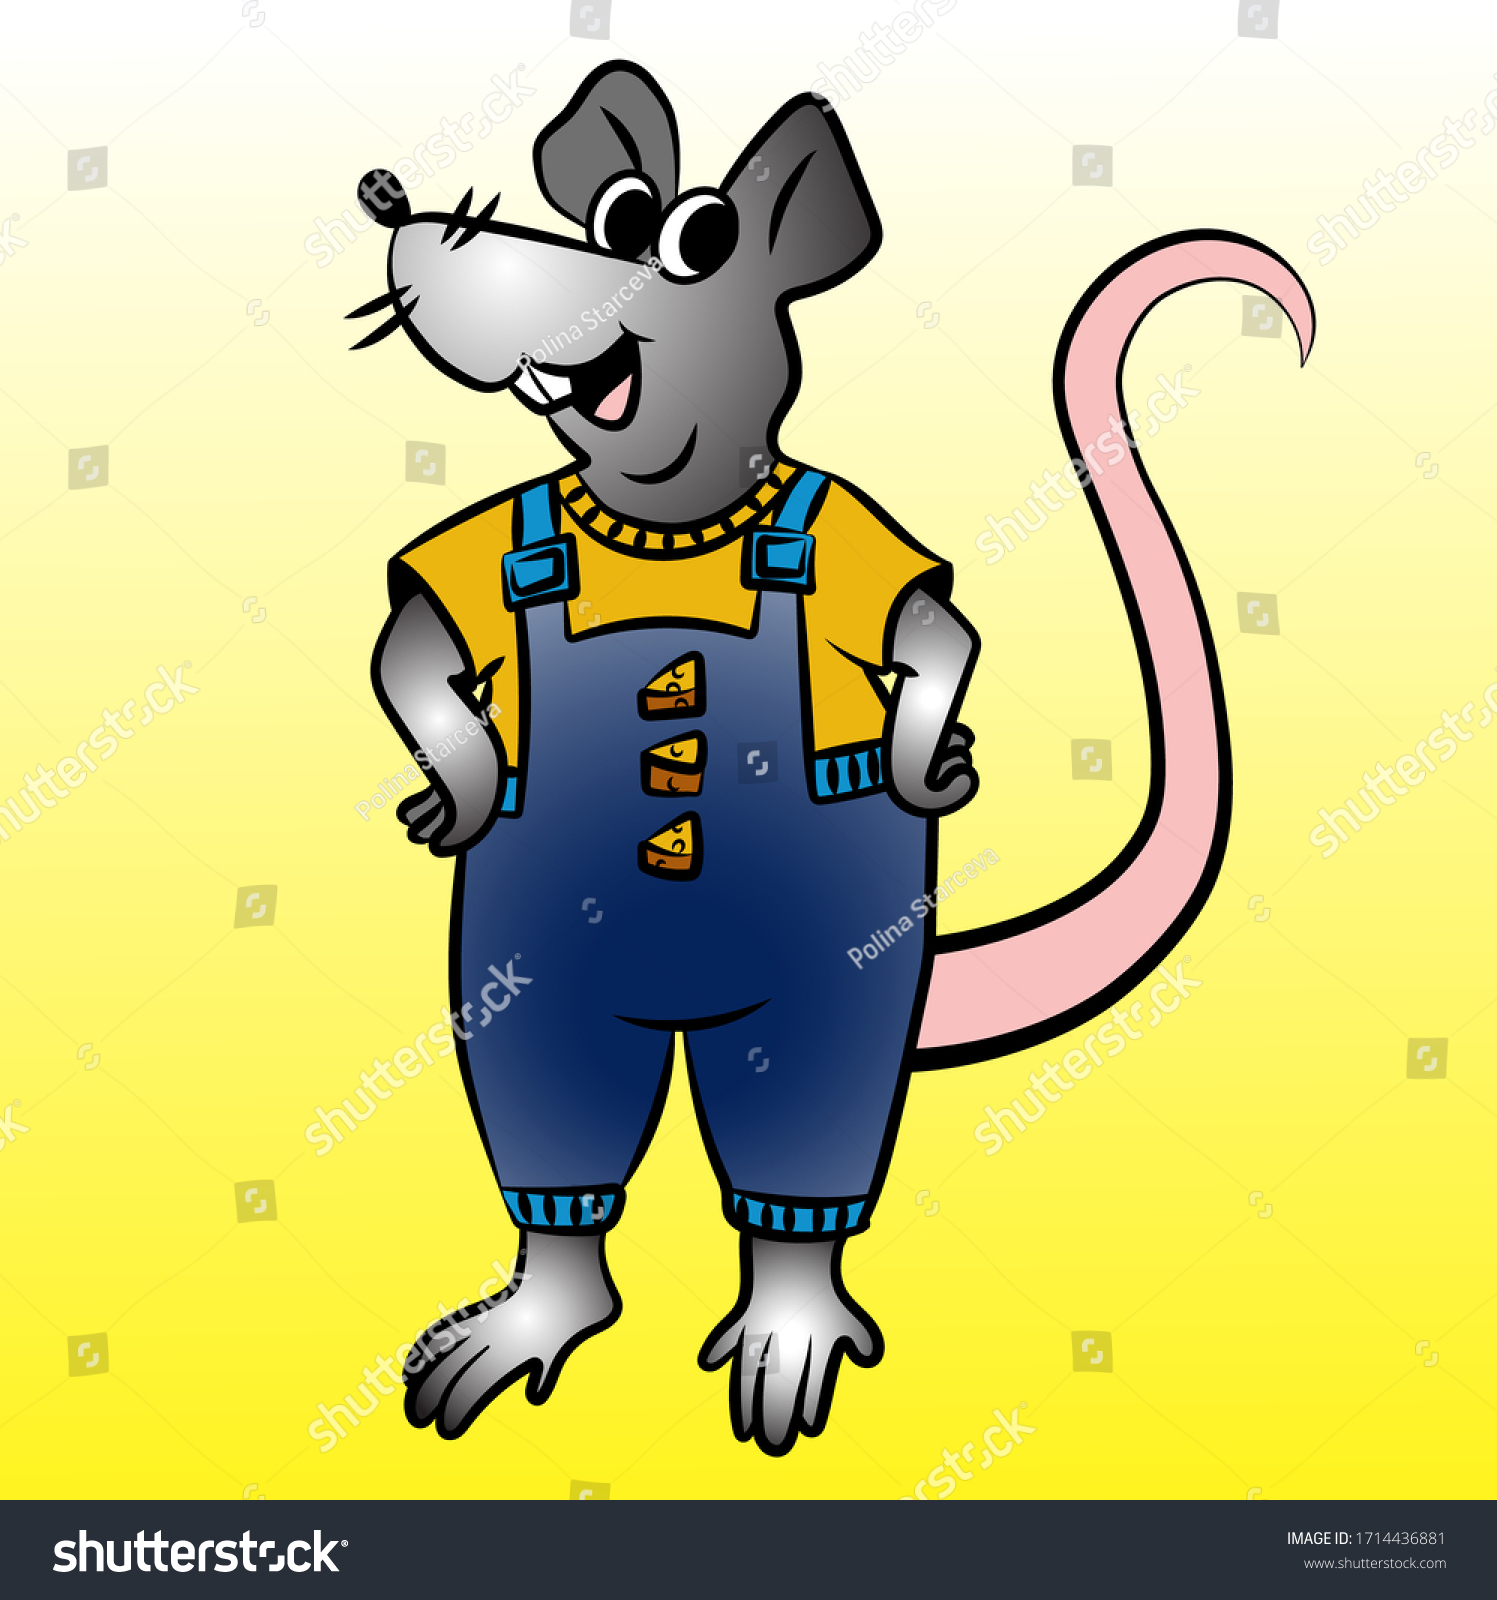 Stock Vector Mouse In Suit Cartoon Illustration 1714436881 